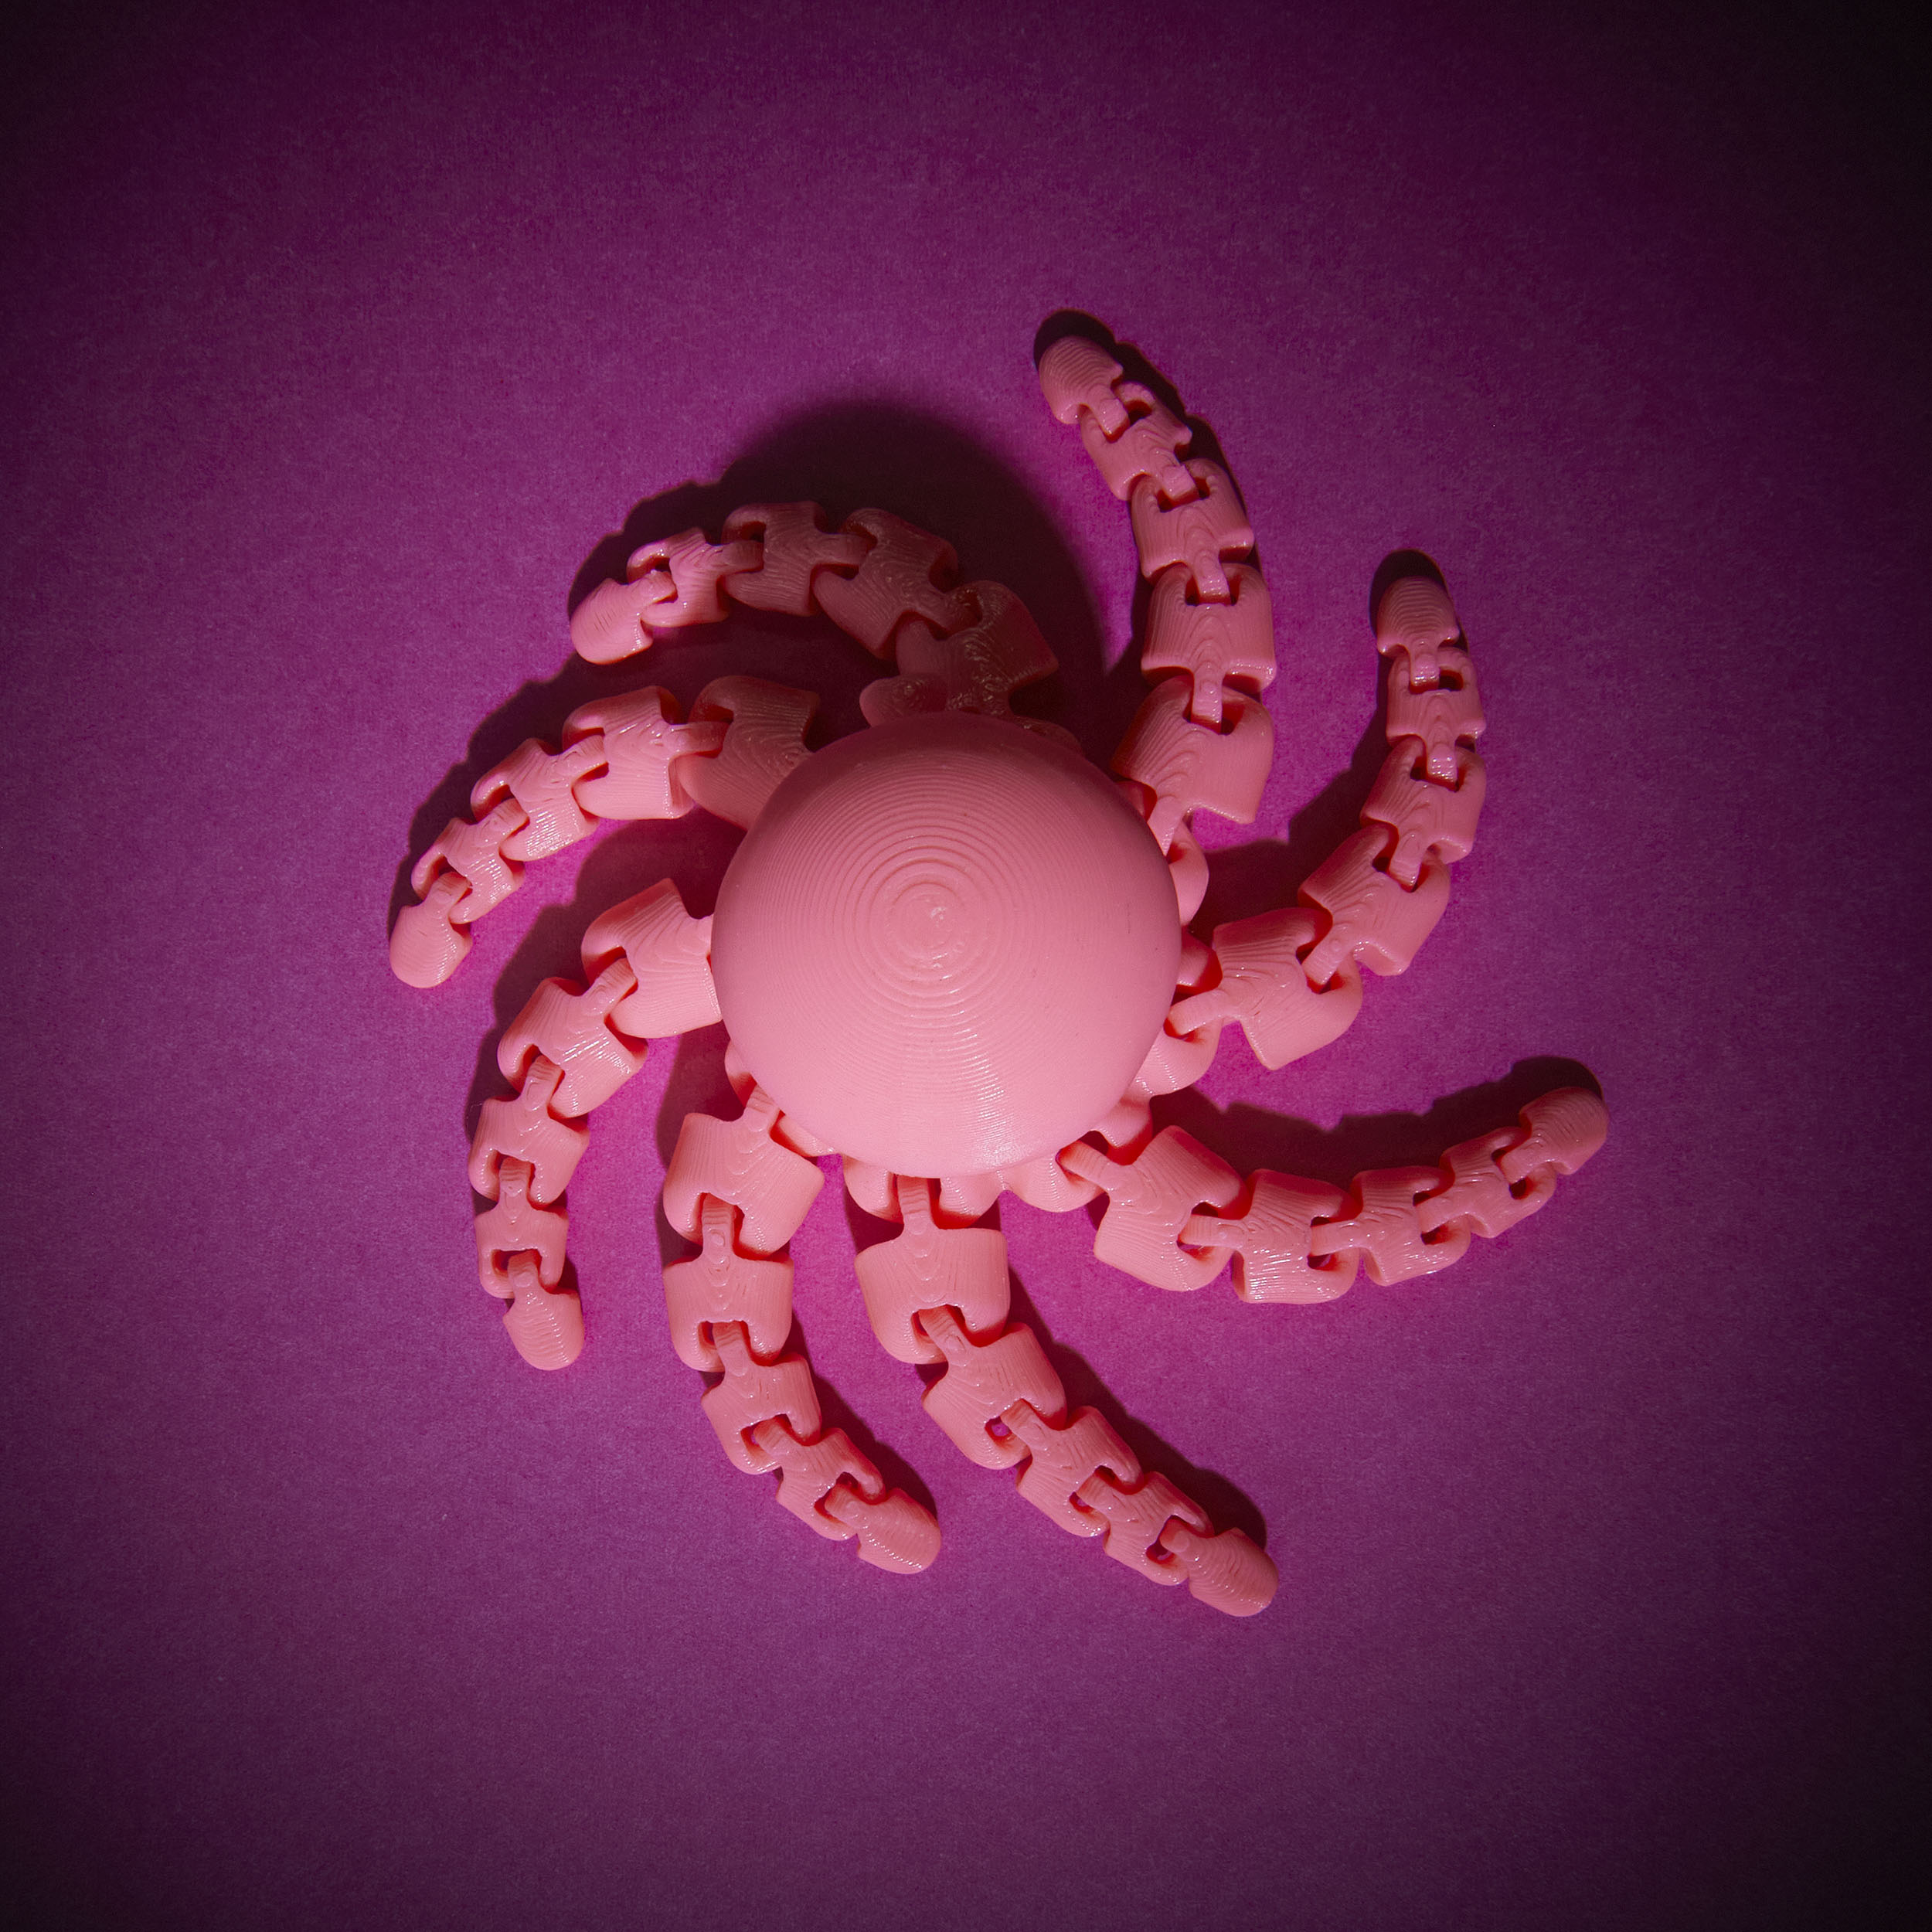 Photograph by Rhianna Cleaveley showing a 3-D printed pink octopus from above on a darker pink background.